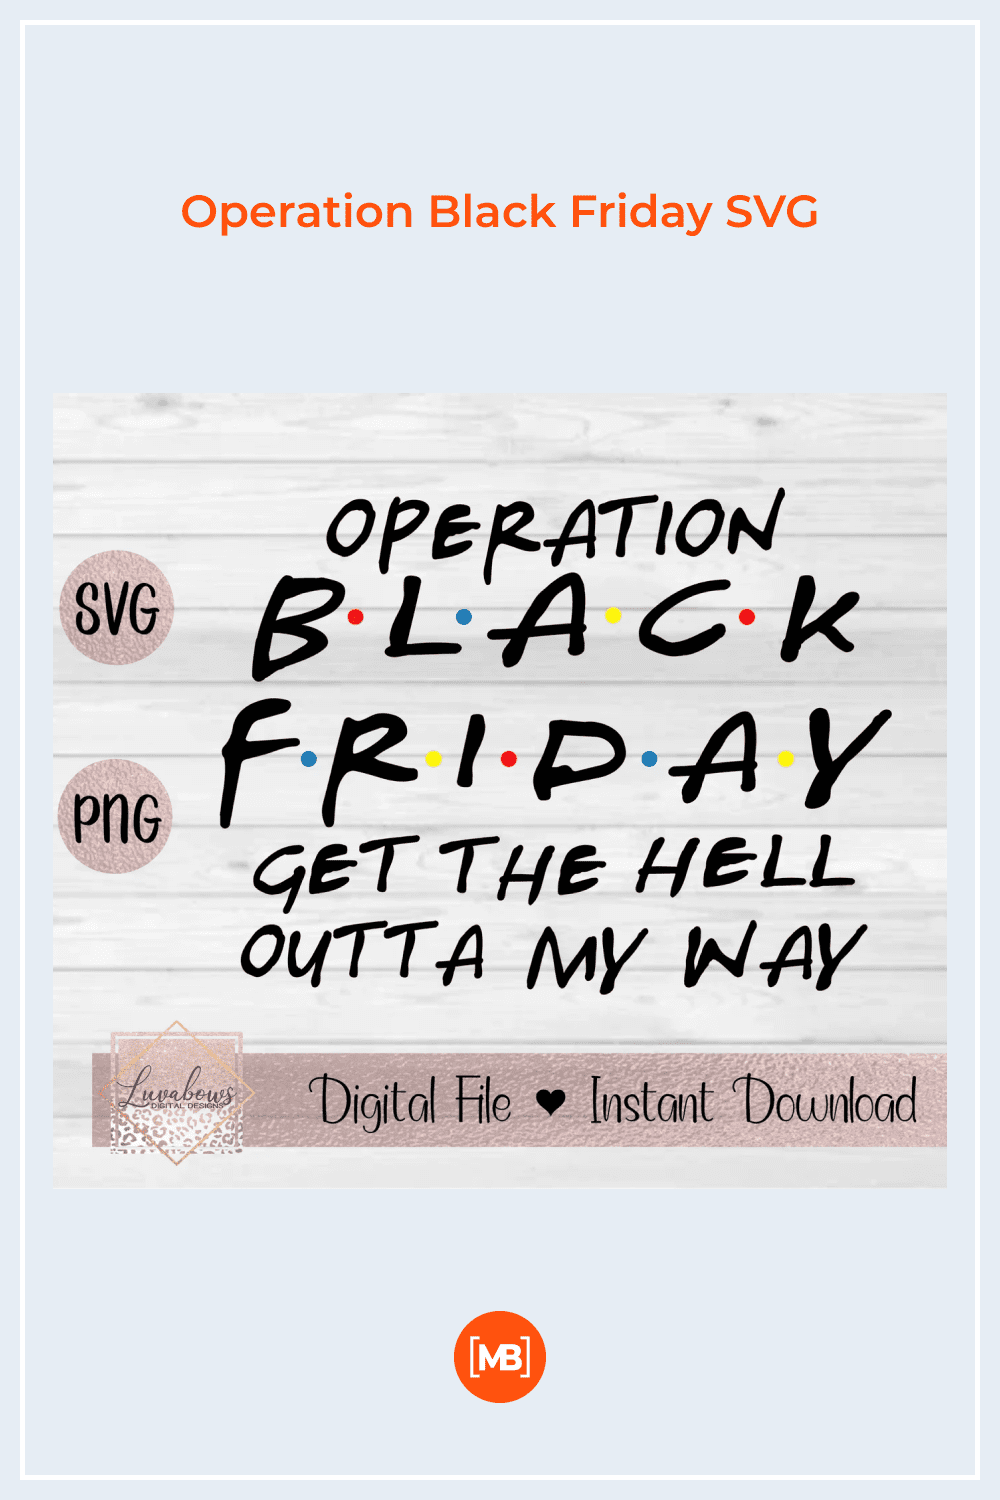 Black Friday SVG with titles from Friends on White Background.